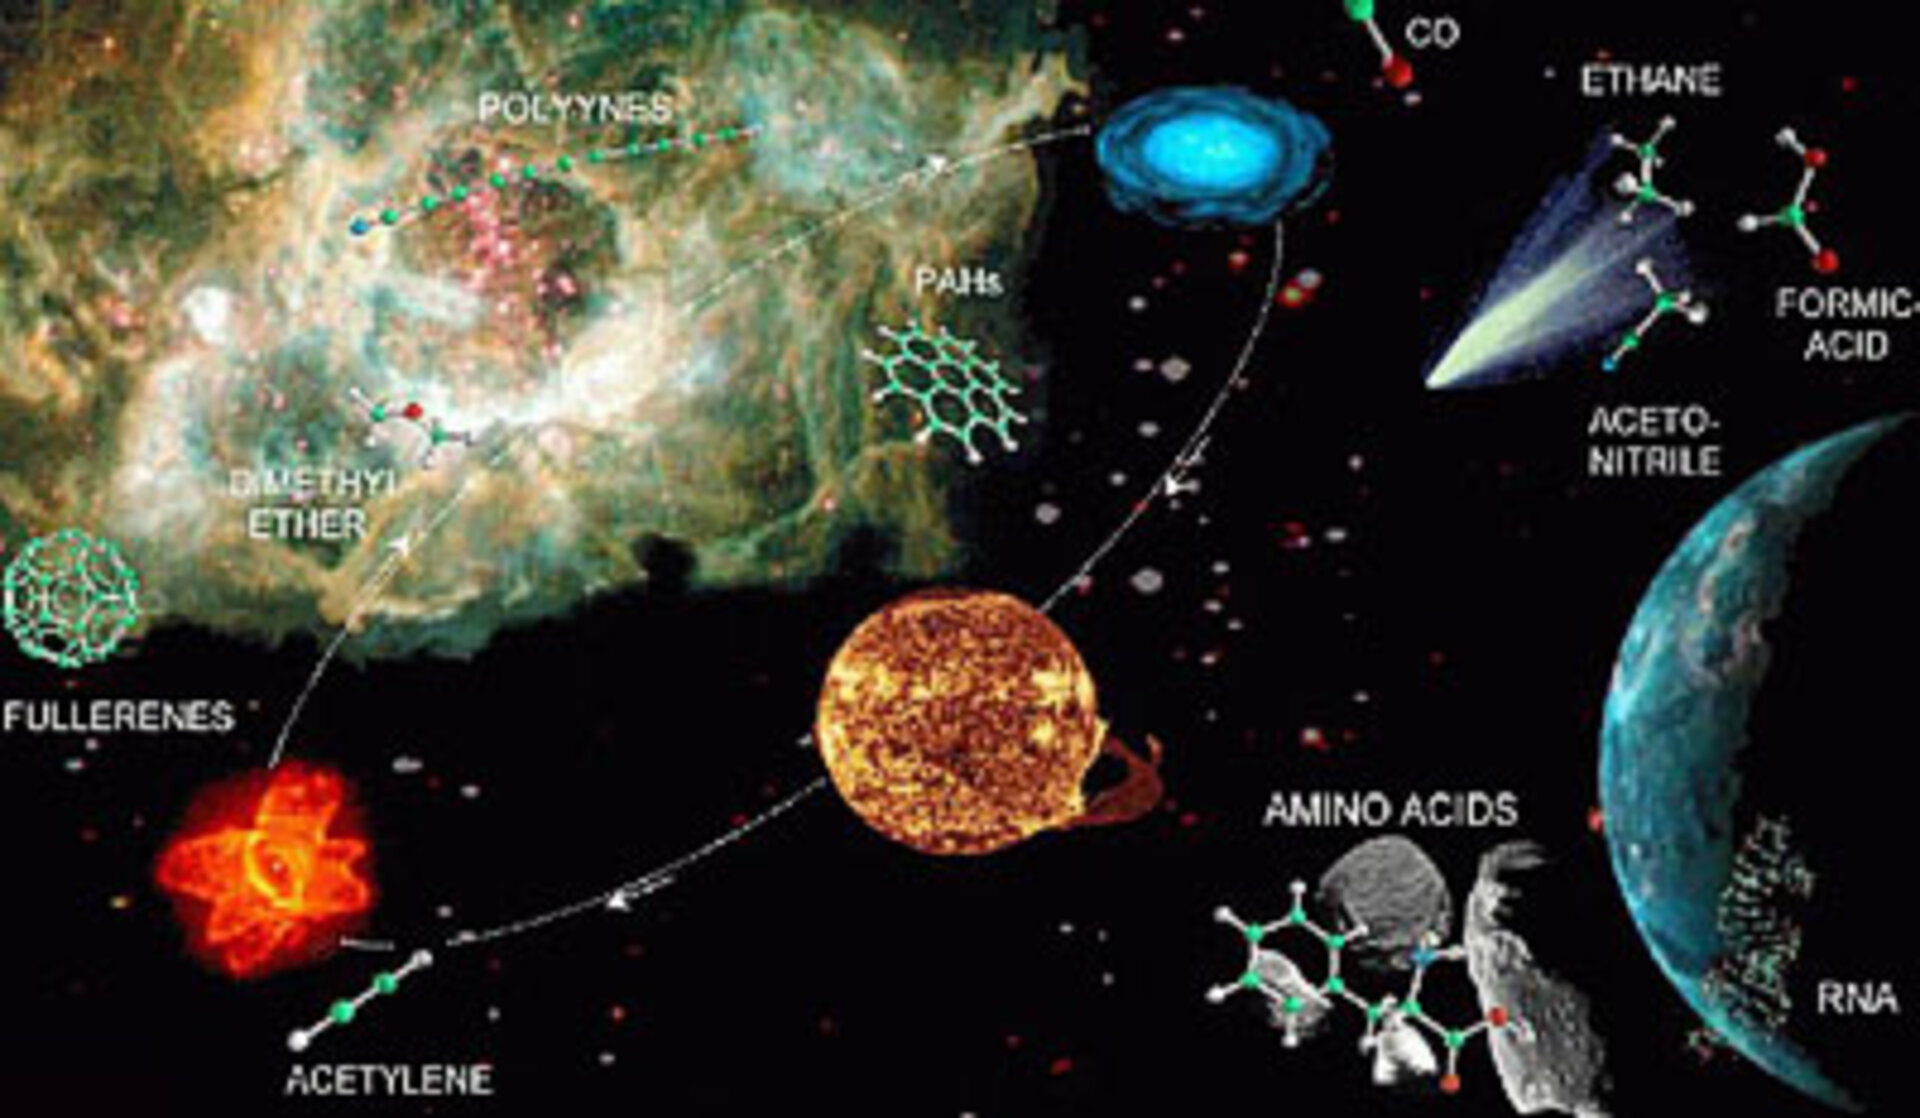 Are chemical compounds linked to life present in space?